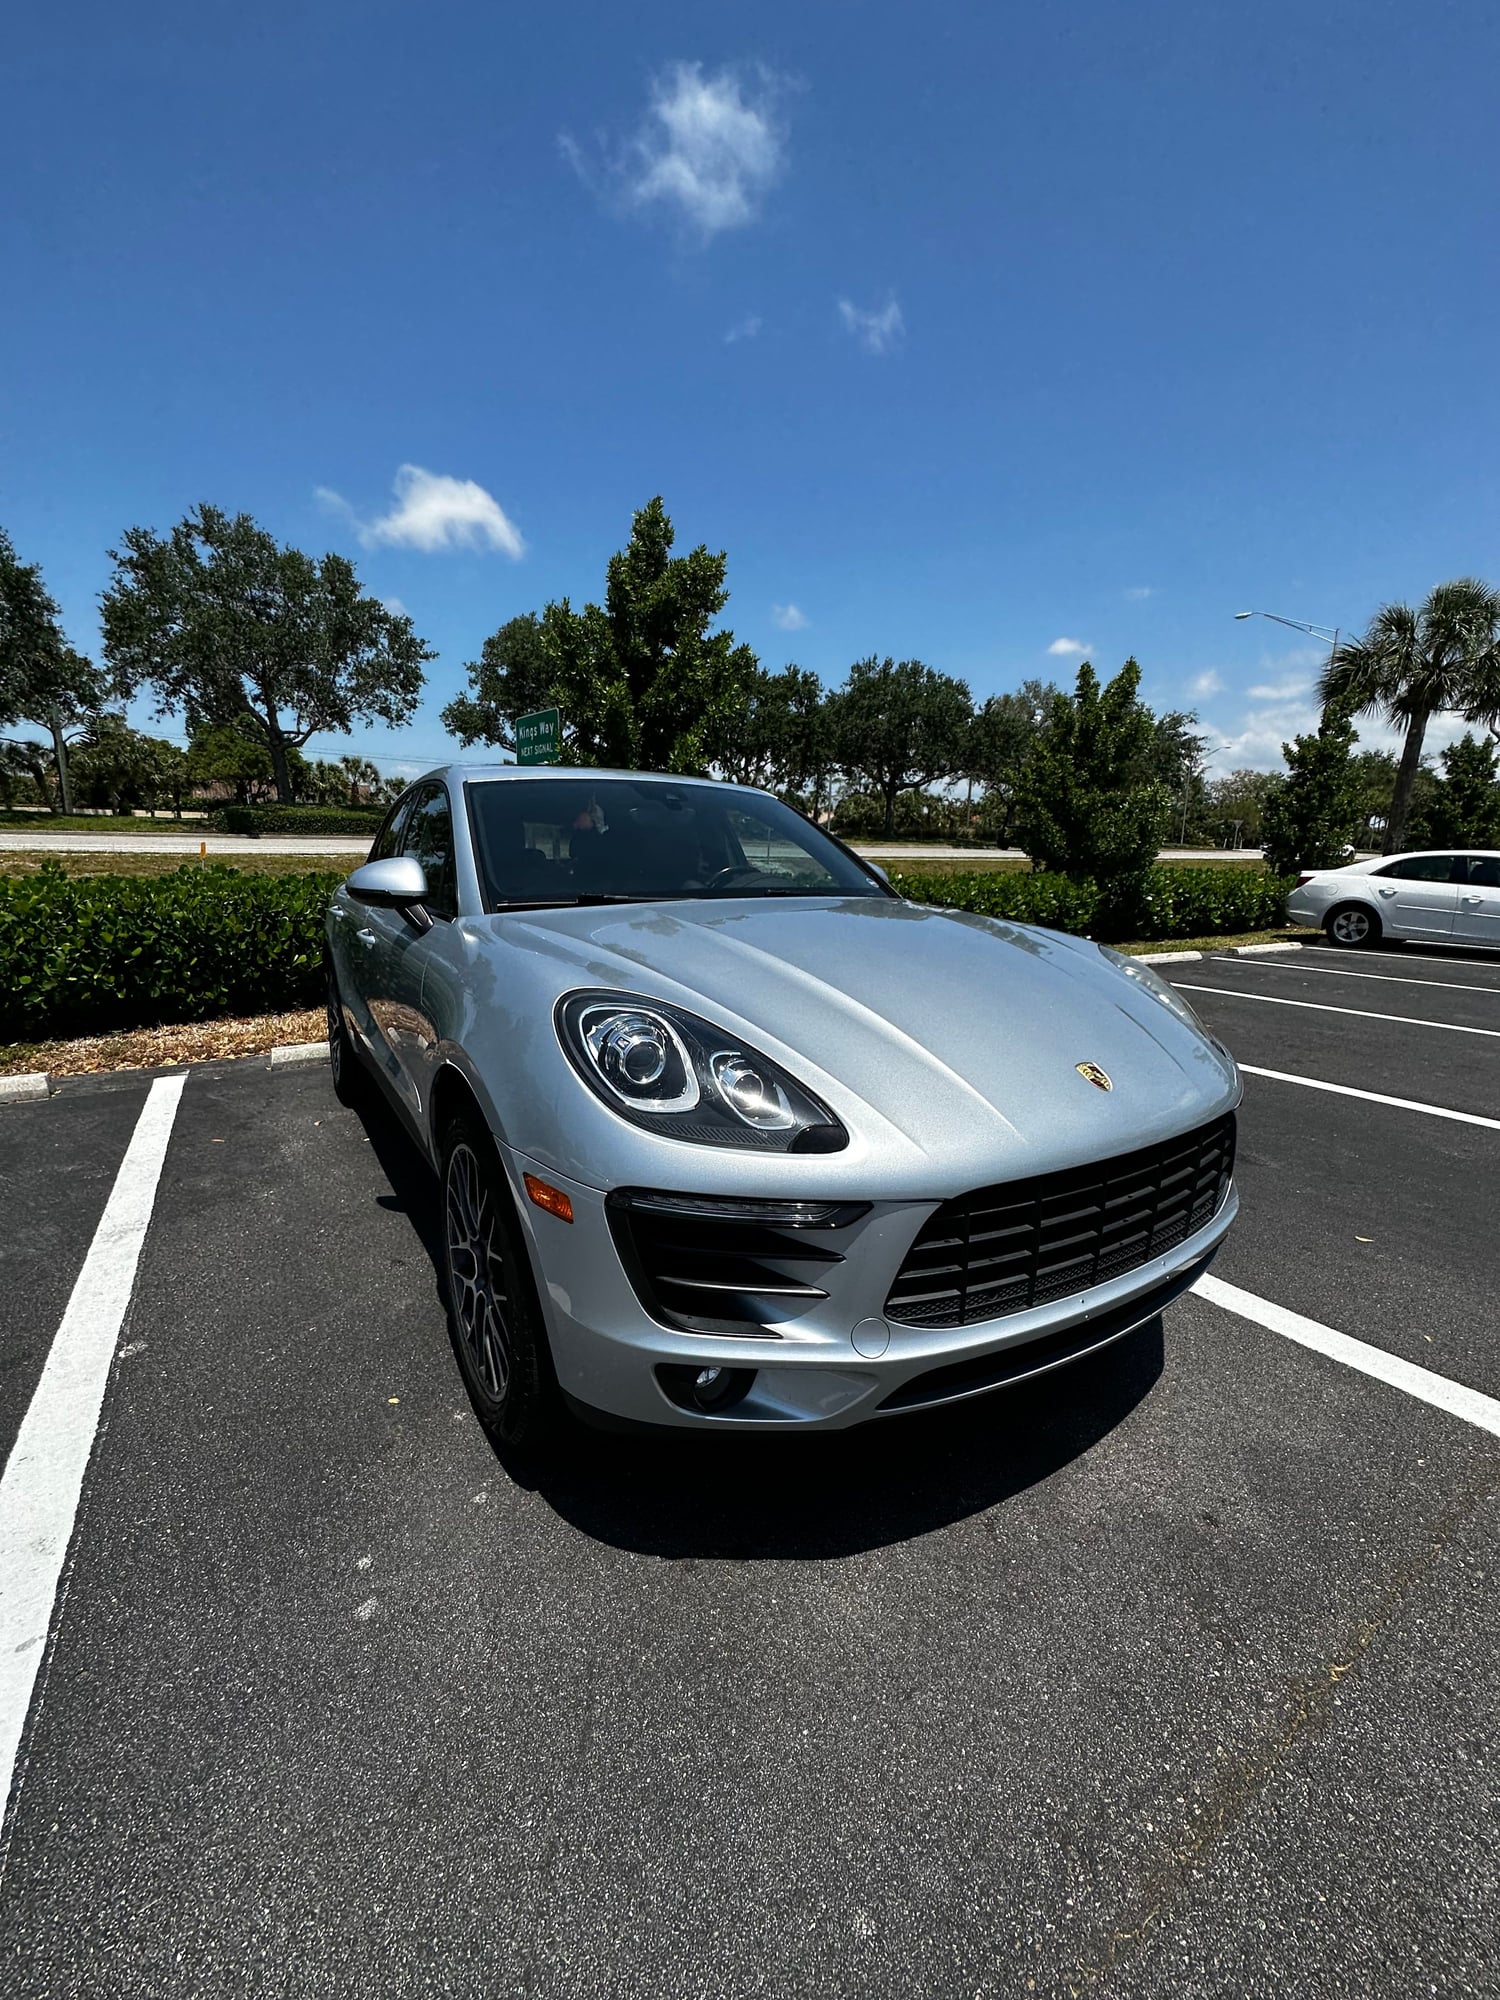 2018 Porsche Macan - 2018 Porsche Macan Sport Edition - Used - VIN WP1AA2A56JLB14171 - 59,103 Miles - 4 cyl - AWD - Automatic - SUV - Silver - Naples, FL 34119, United States